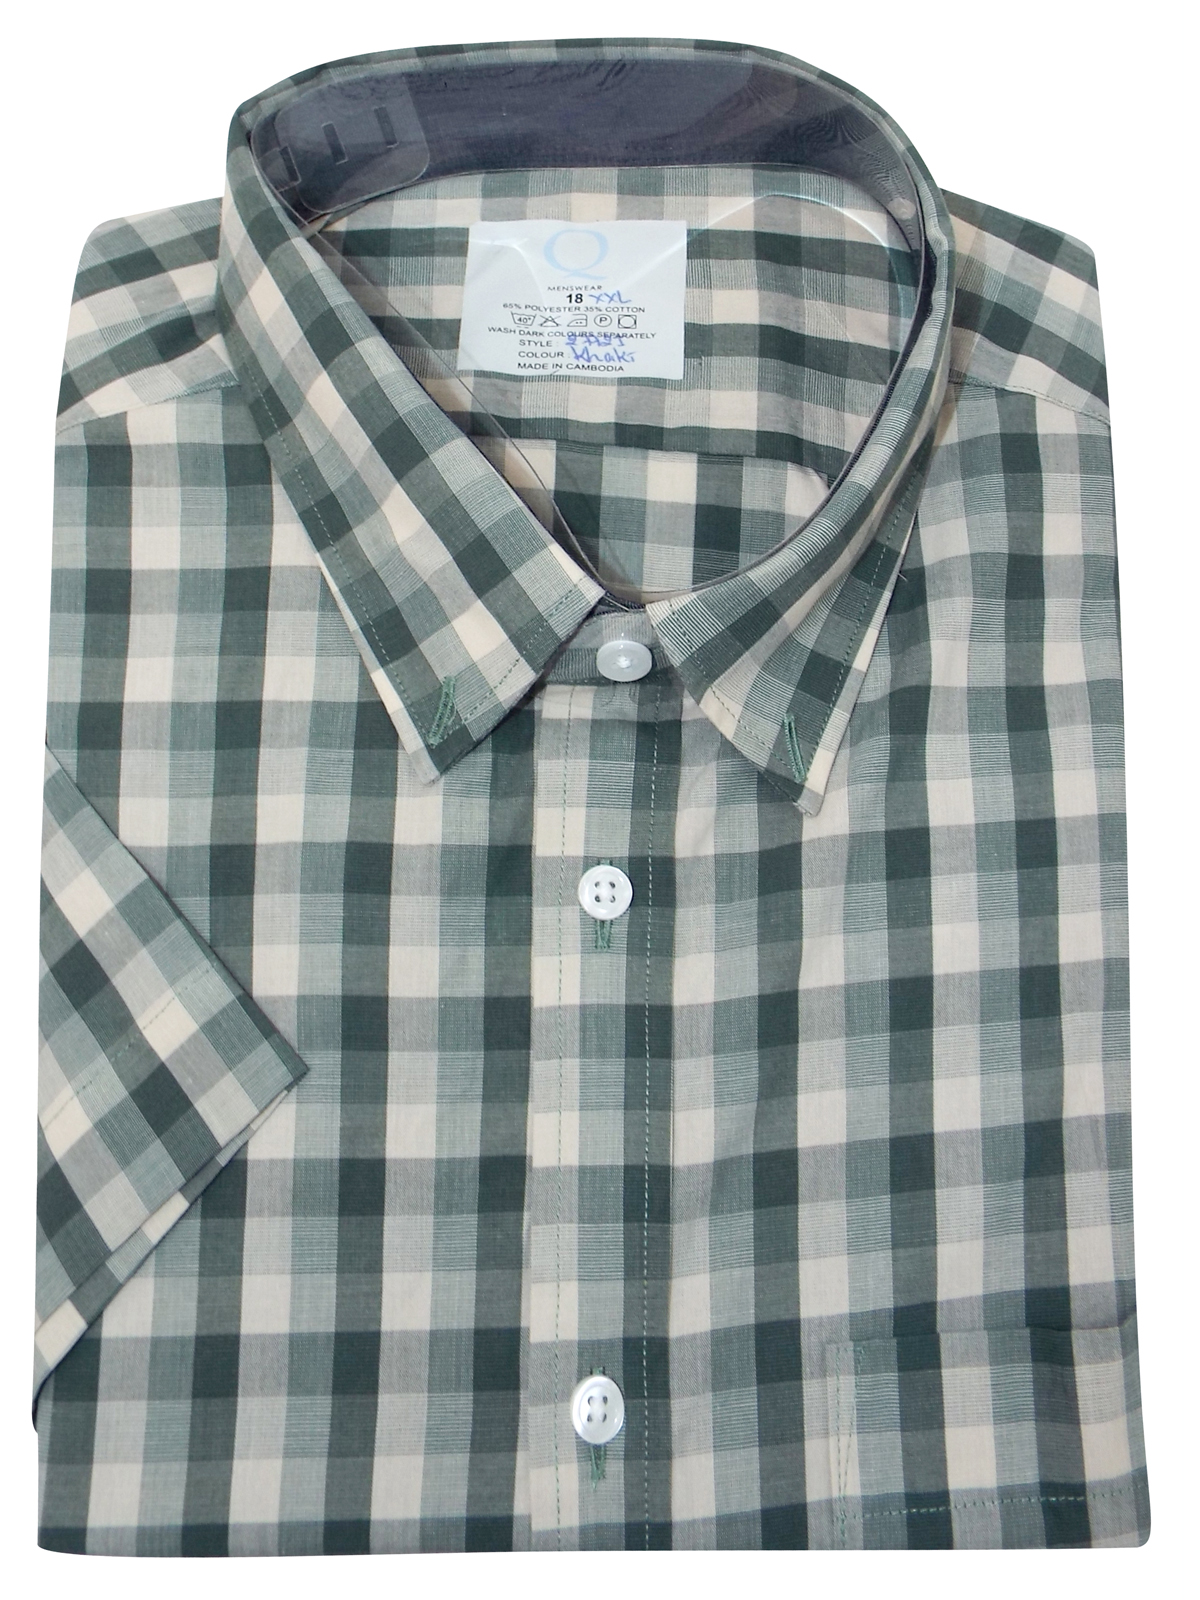 Marks and Spencer - - M&5 KHAKI Cotton Blend Short Sleeve Checked Shirt ...